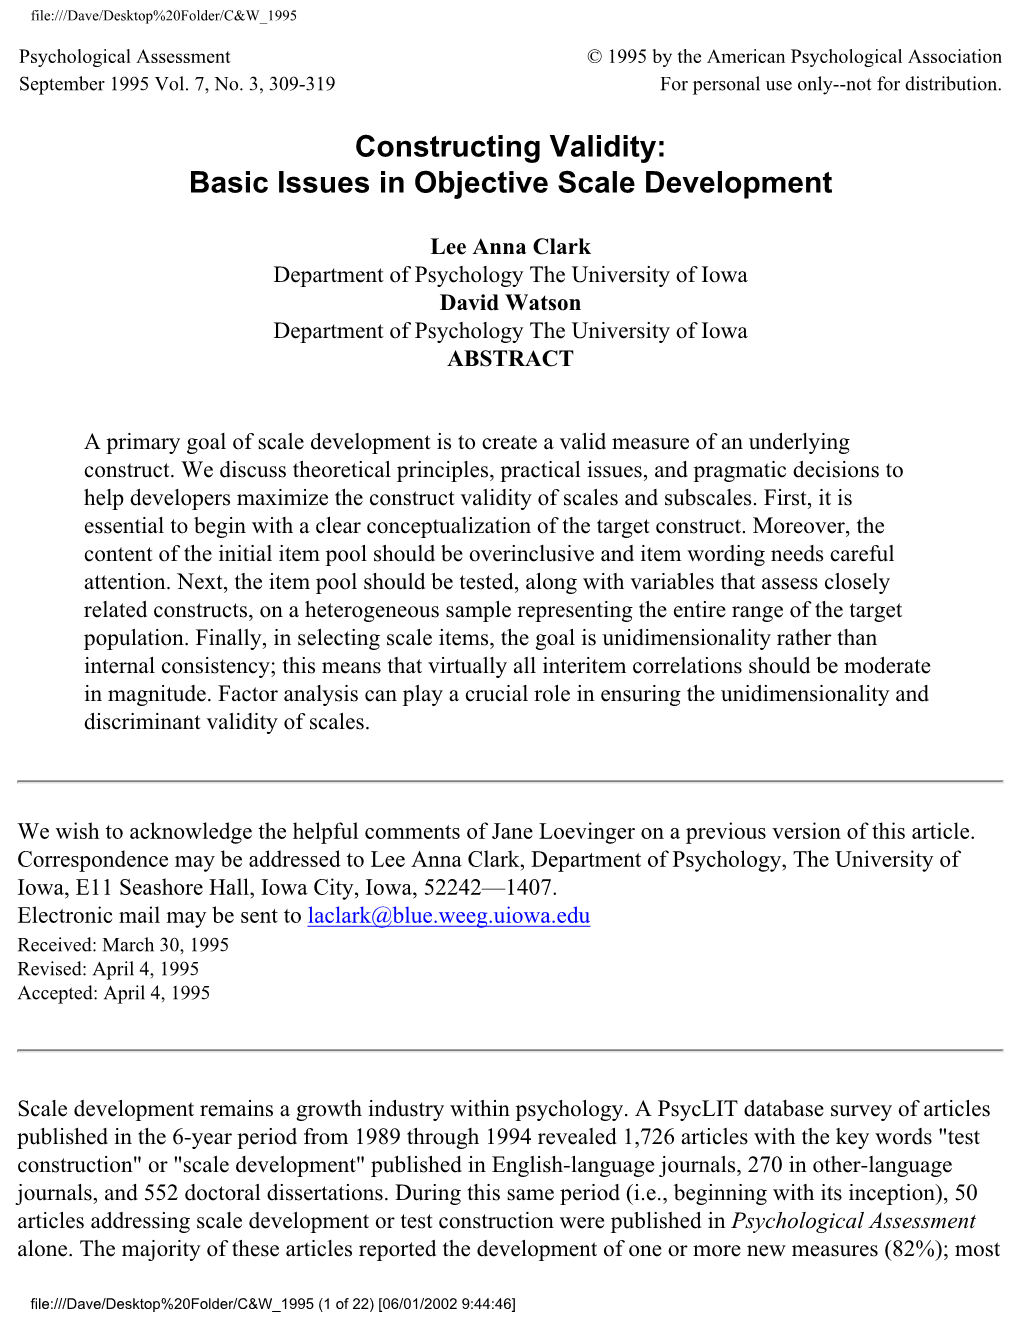 Constructing Validity: Basic Issues in Objective Scale Development